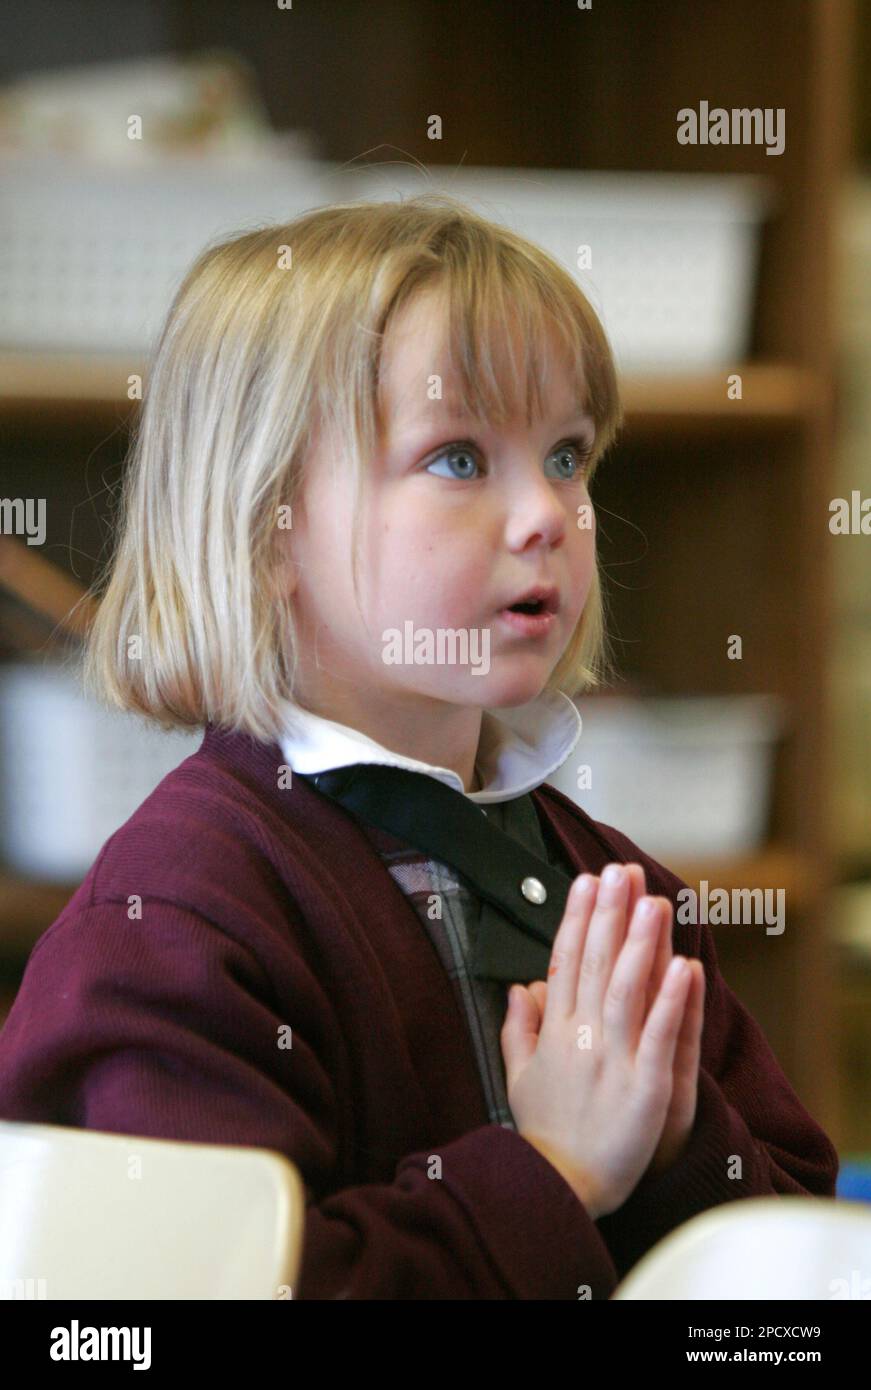 Kara Wheeler, 6, prays along with kindergarten classmates before eating  lunch on May 8, 2006, at Richland Catholic School in Richland, Mich. This  year is the tenth anniversary for the Richland Catholic